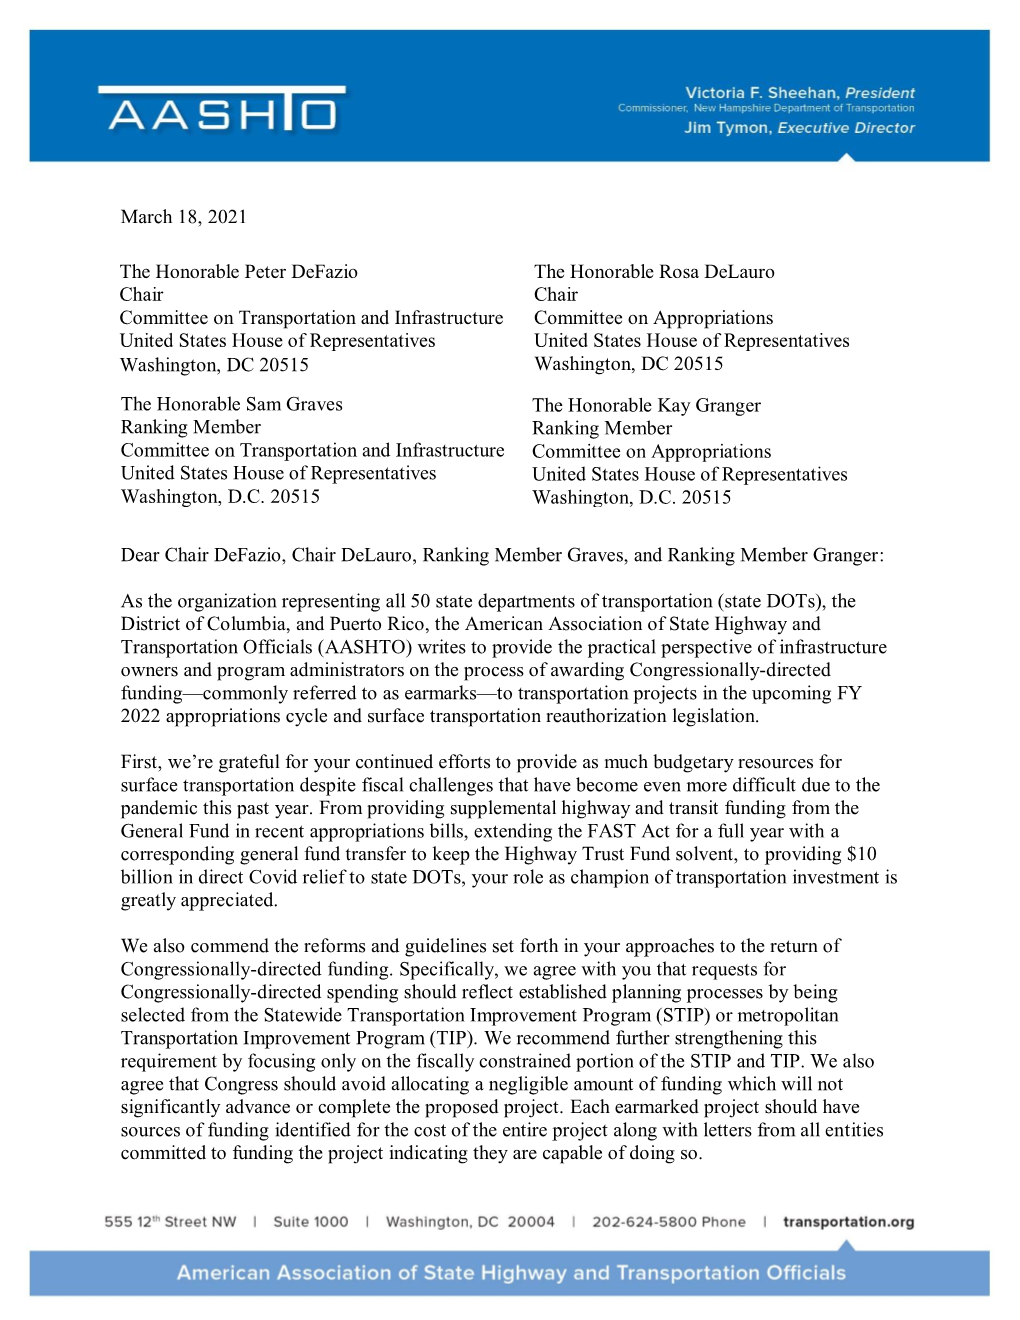 AASHTO Letter to House T&I and Appropriations Committees On